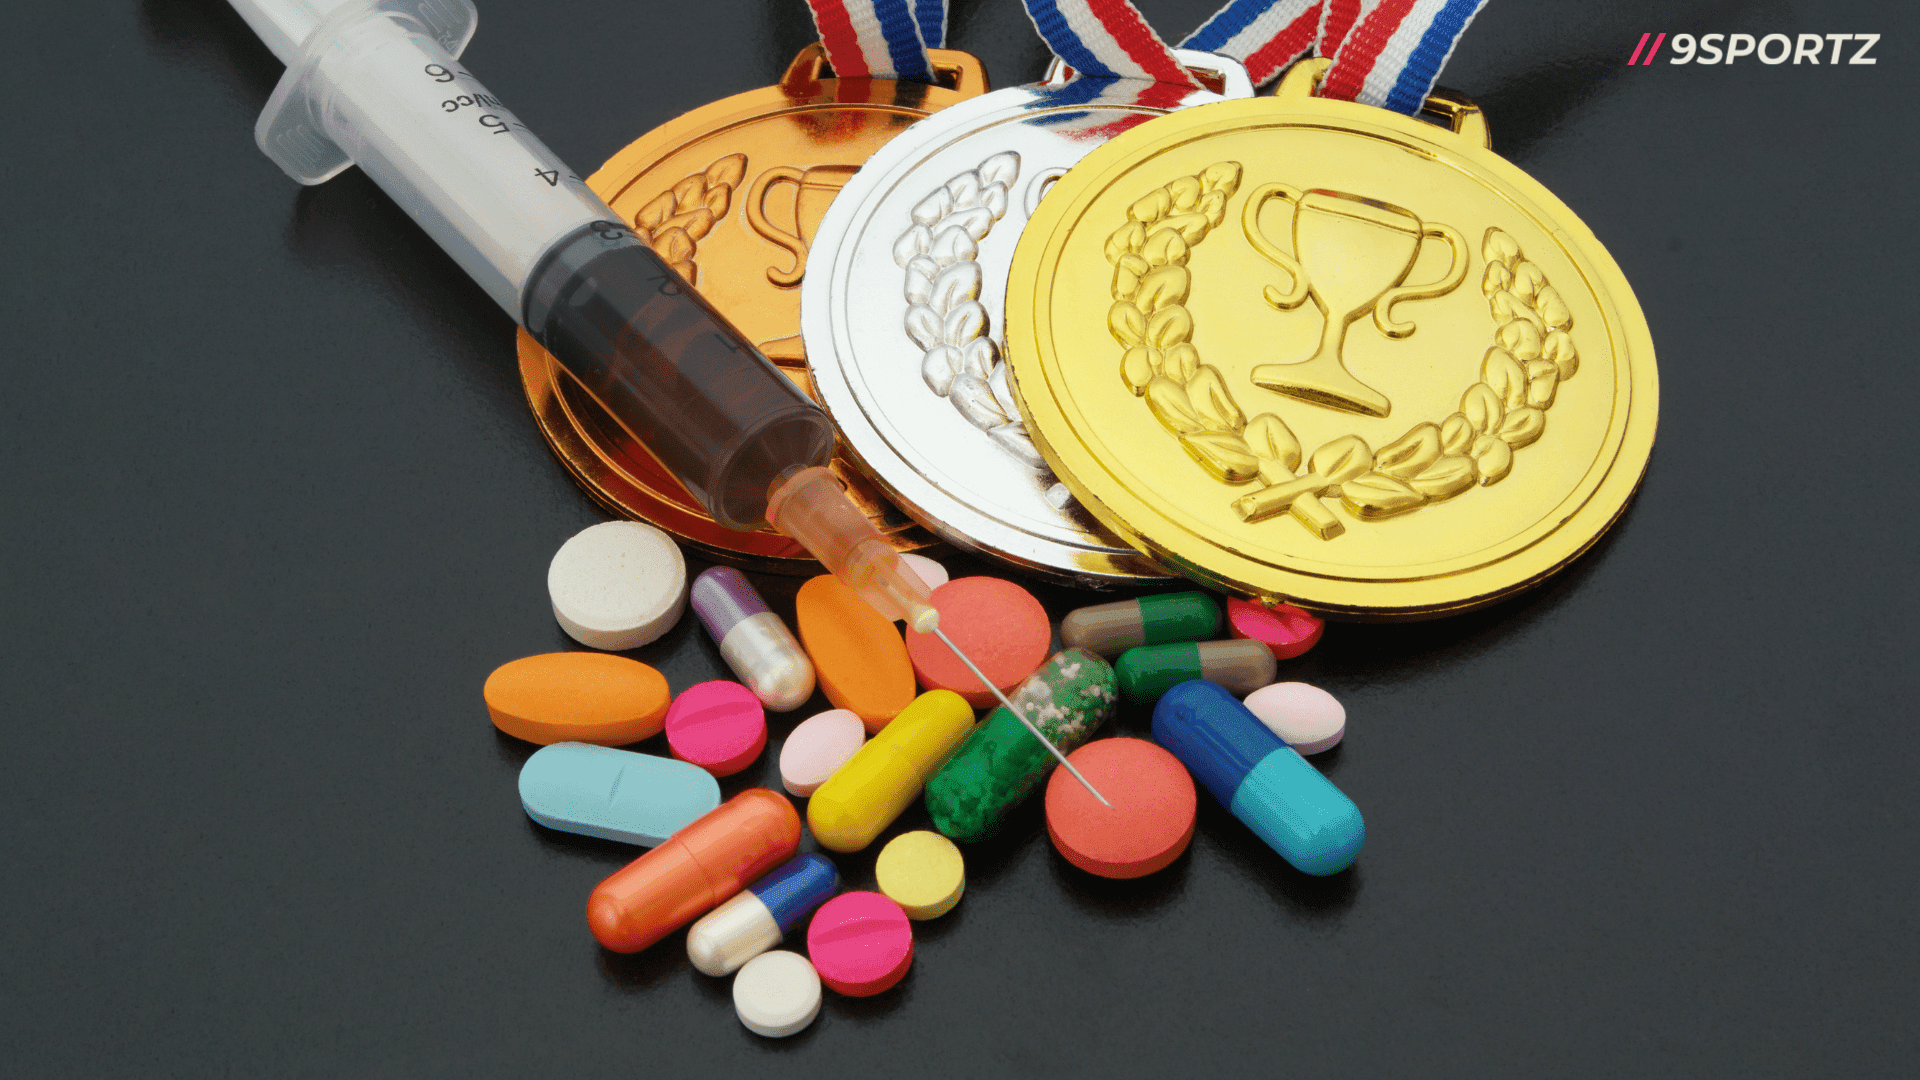 The Hidden Opponents: Doping and PED&#8217;s in the Sports Arena